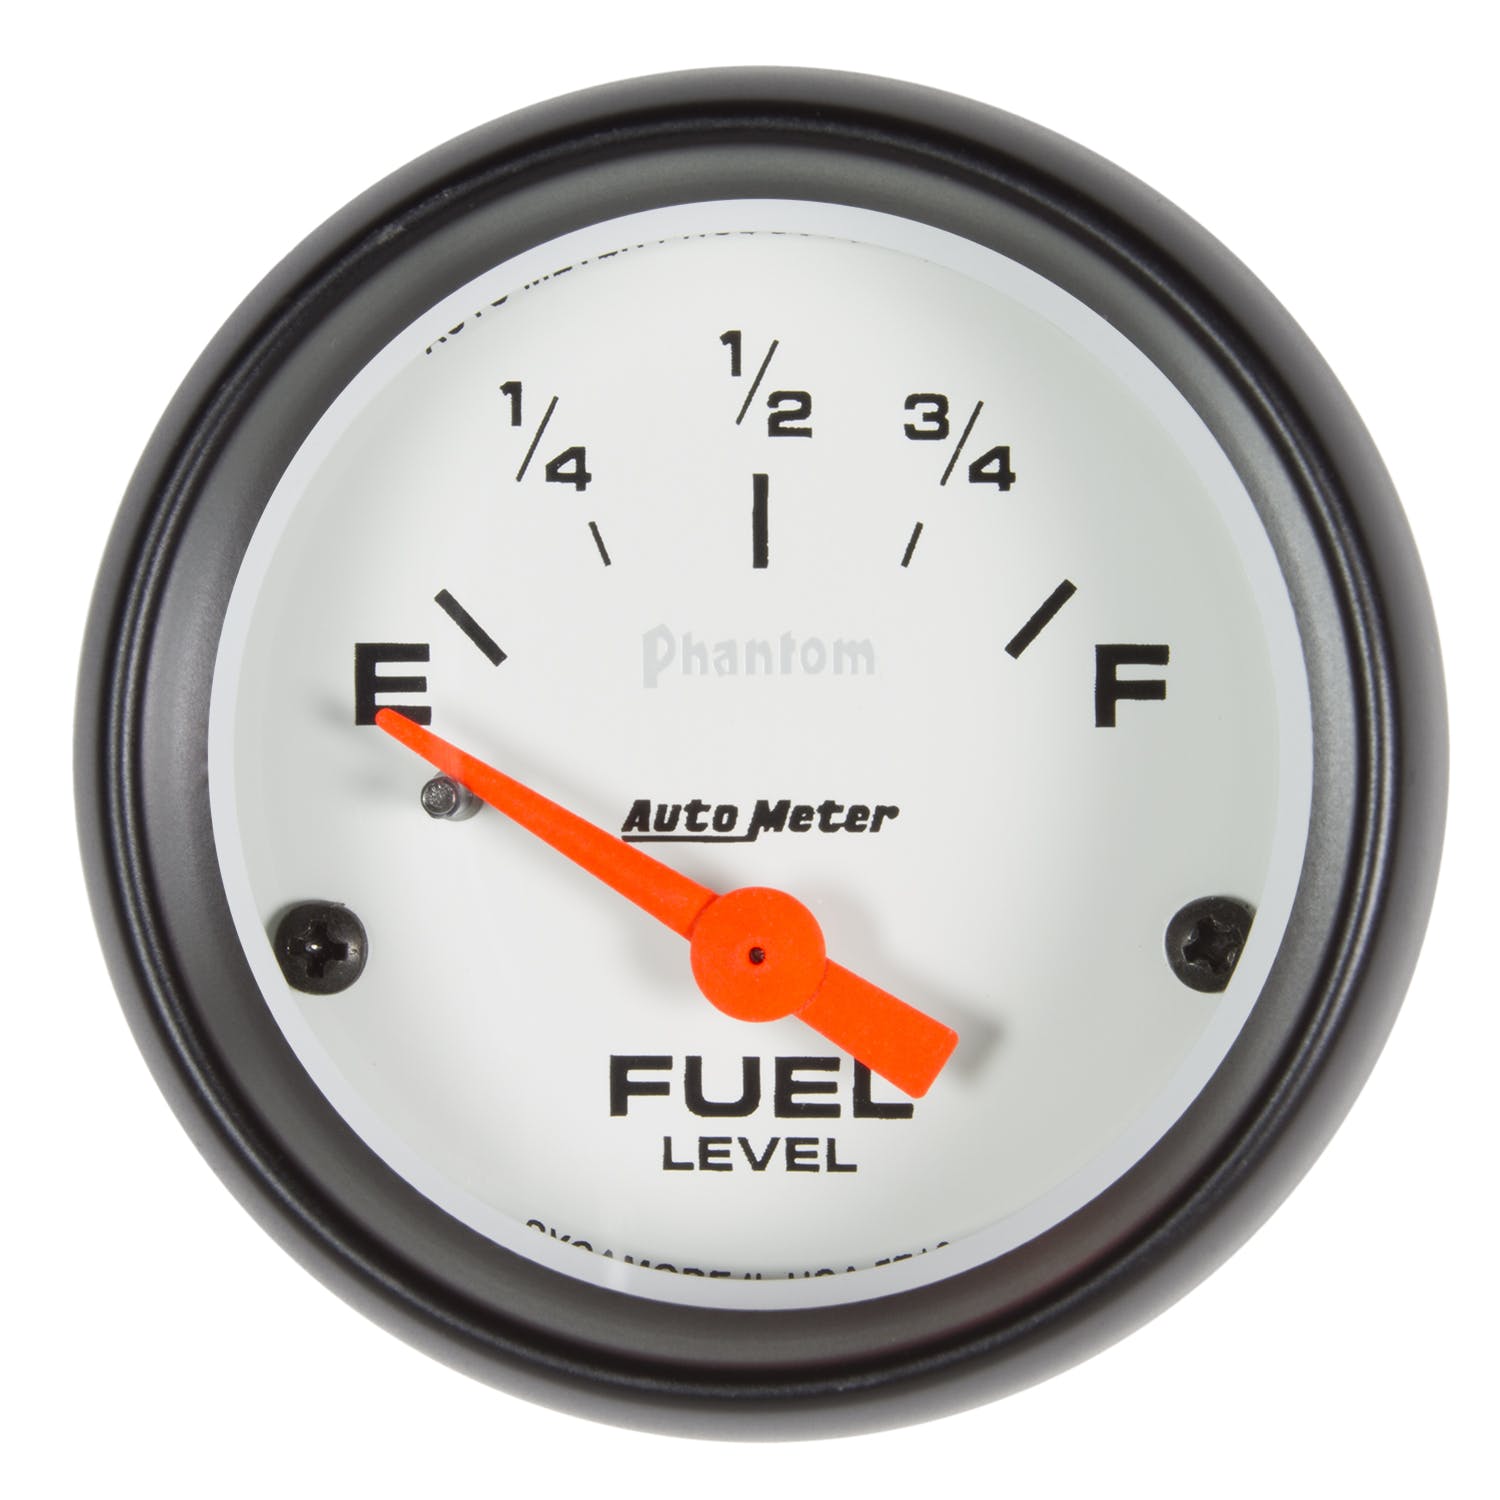 AutoMeter Products 5719 Fuel Level Gauge 2 1/16, 73?E TO 10?F Electric Phantom